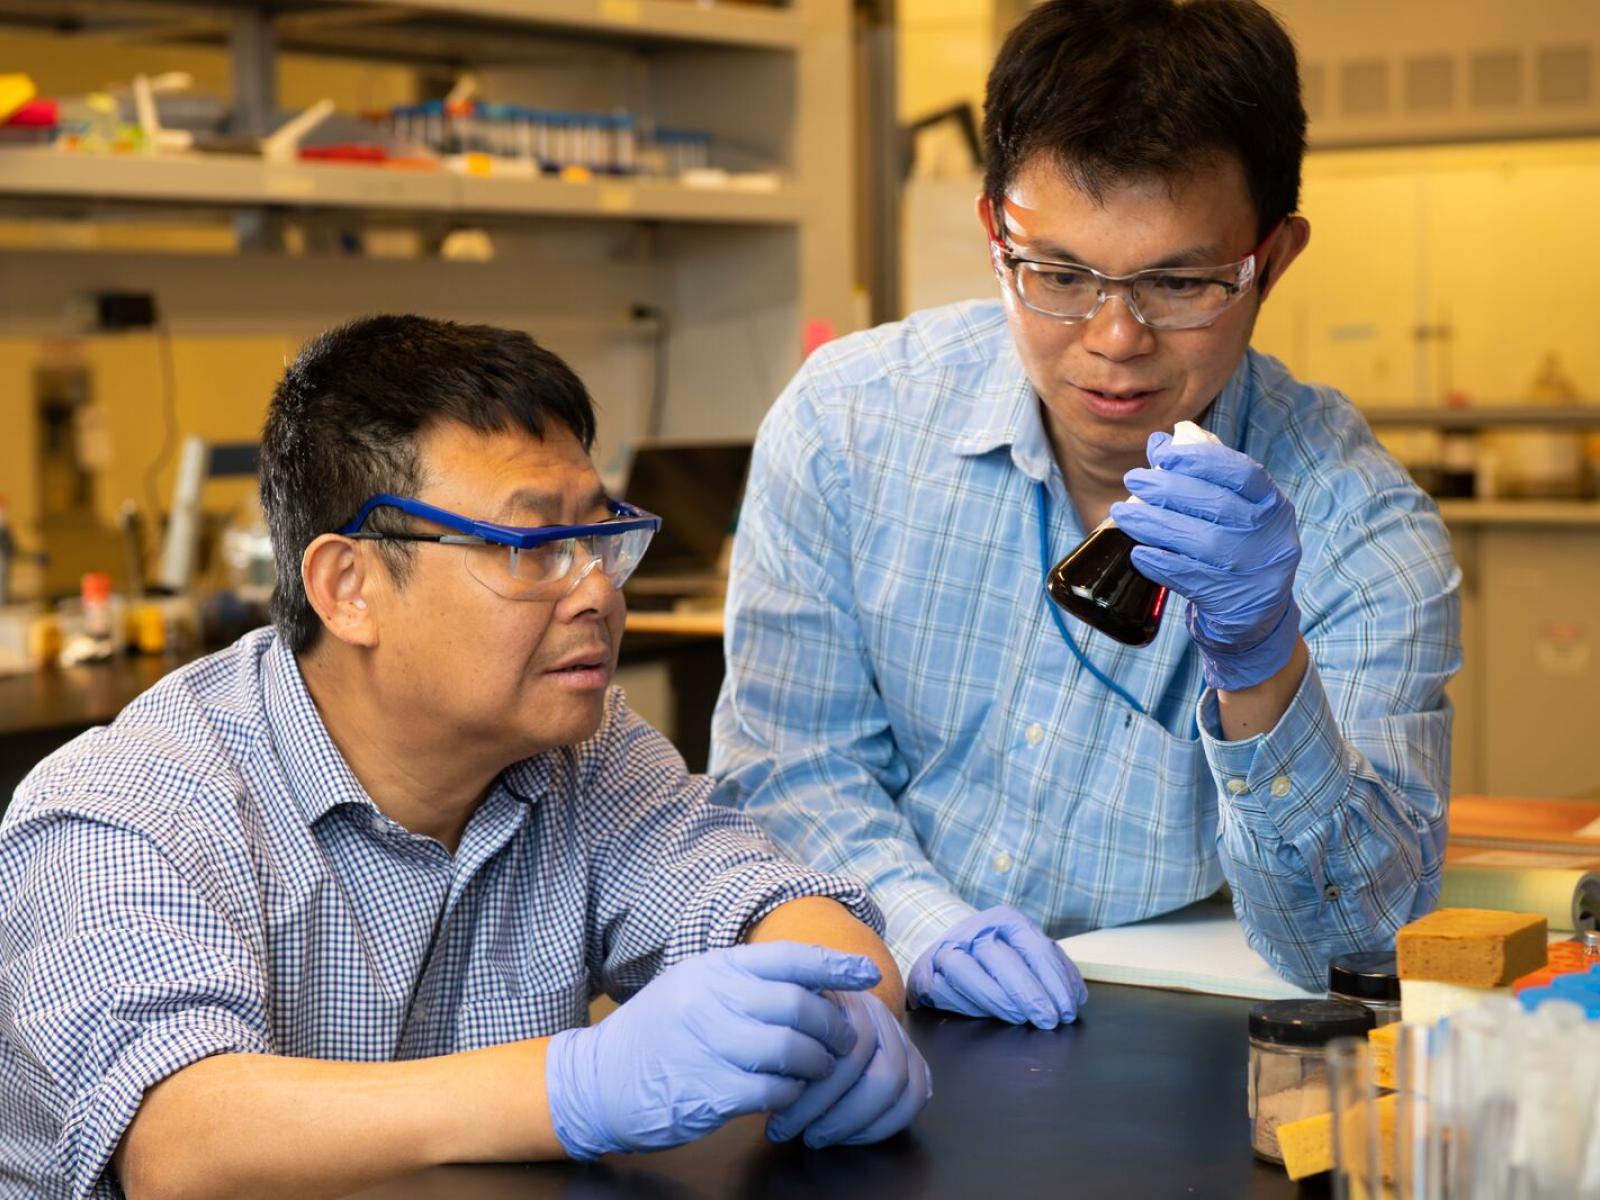 Two scientists examine lignin products in the lab